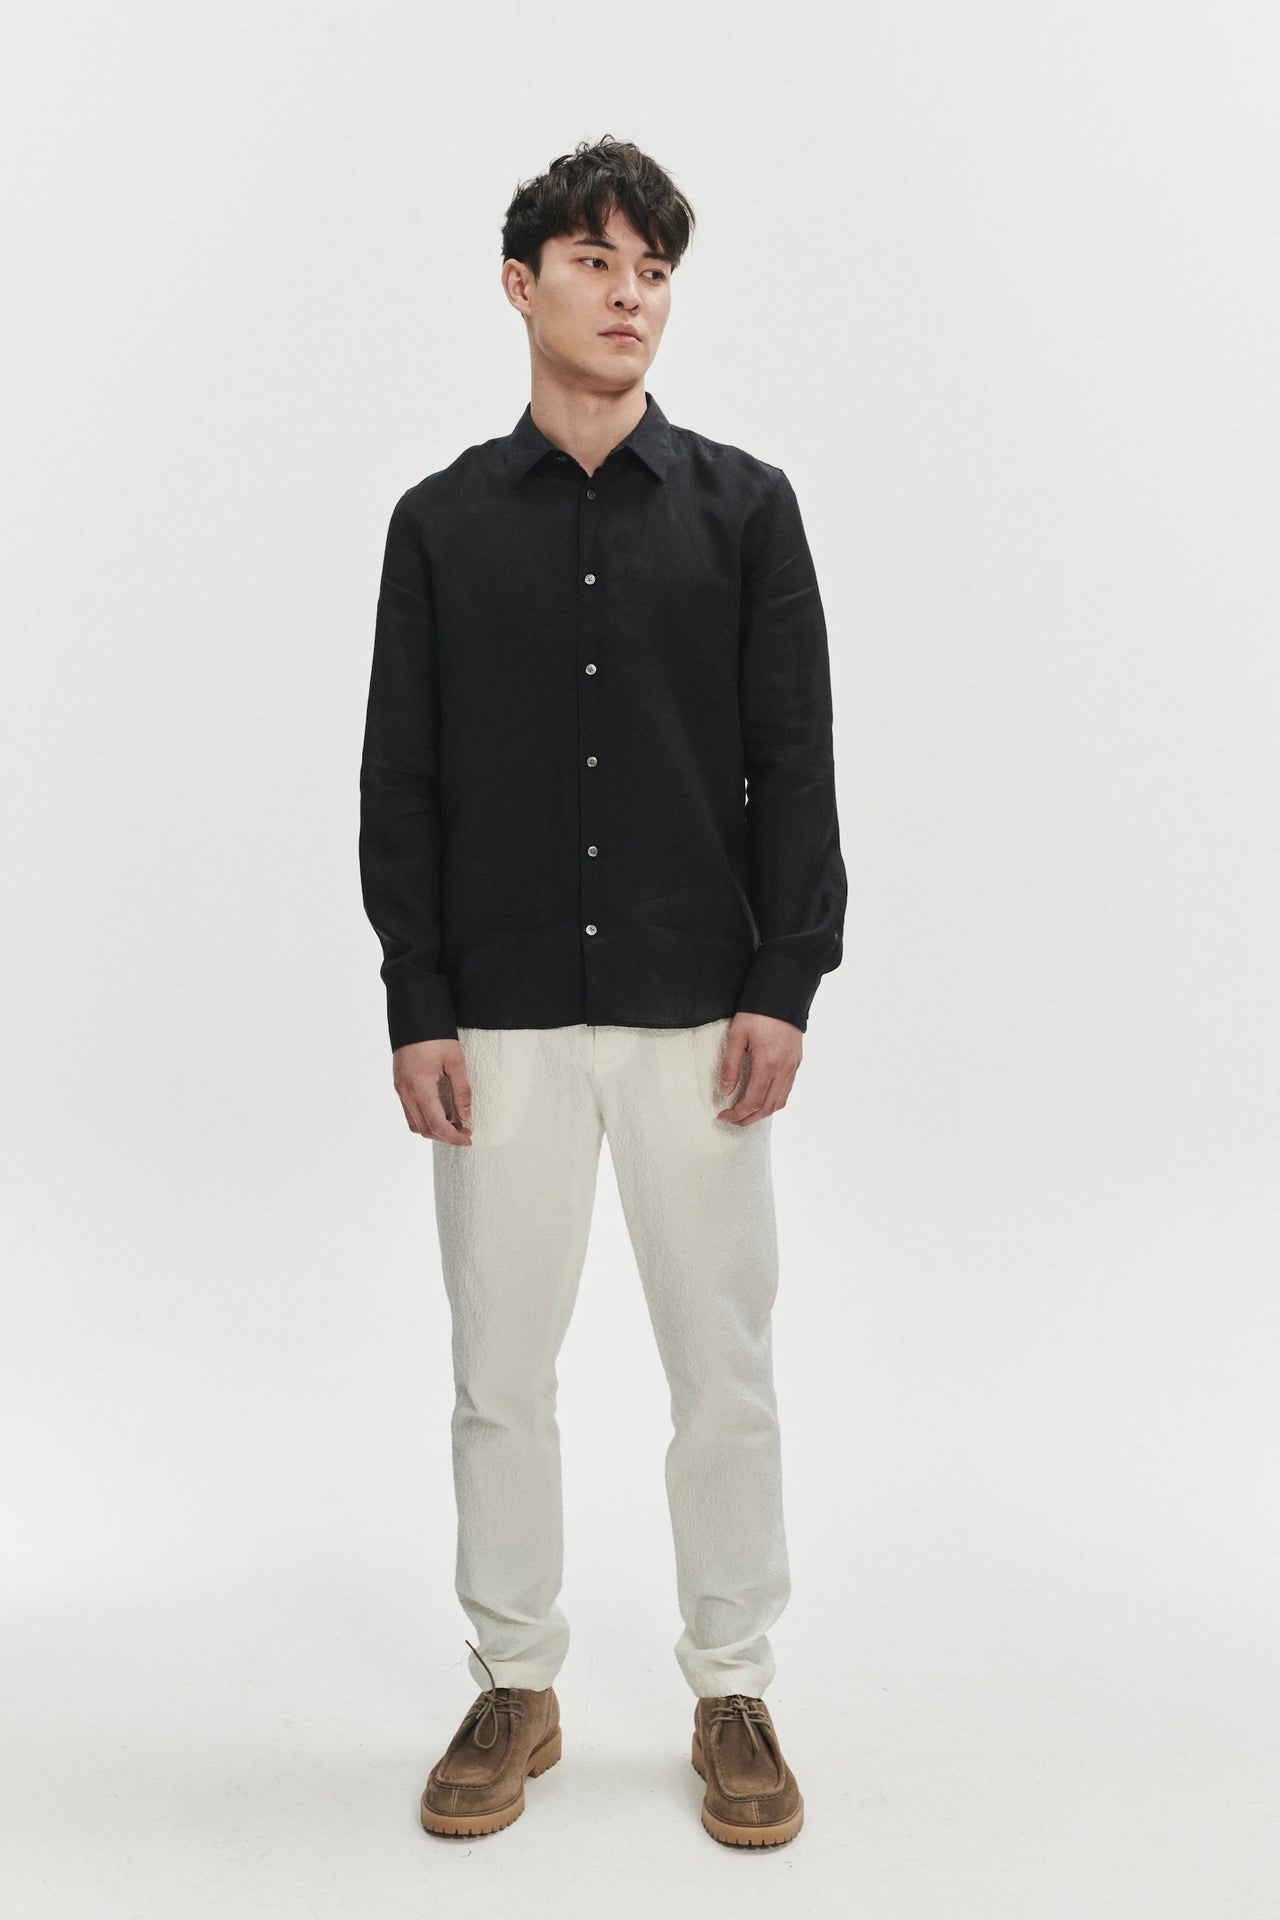 Feel Good Shirt in a Soft and Airy Black Portuguese Linen